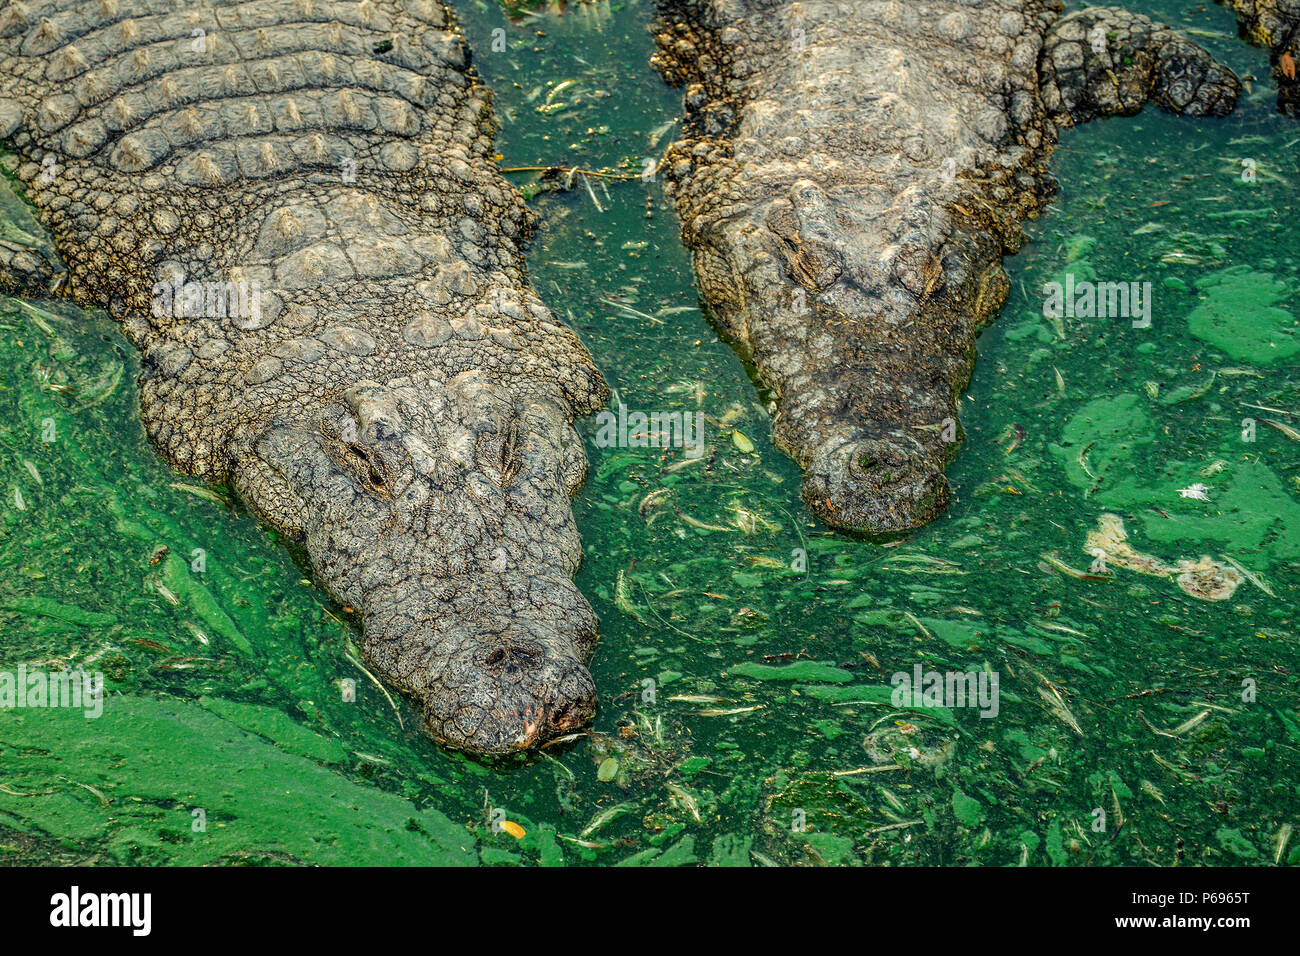 Two Nile Crocodiles - Crocodylus Niloticus - from above, in water with green algae and floating leaves. Stock Photo